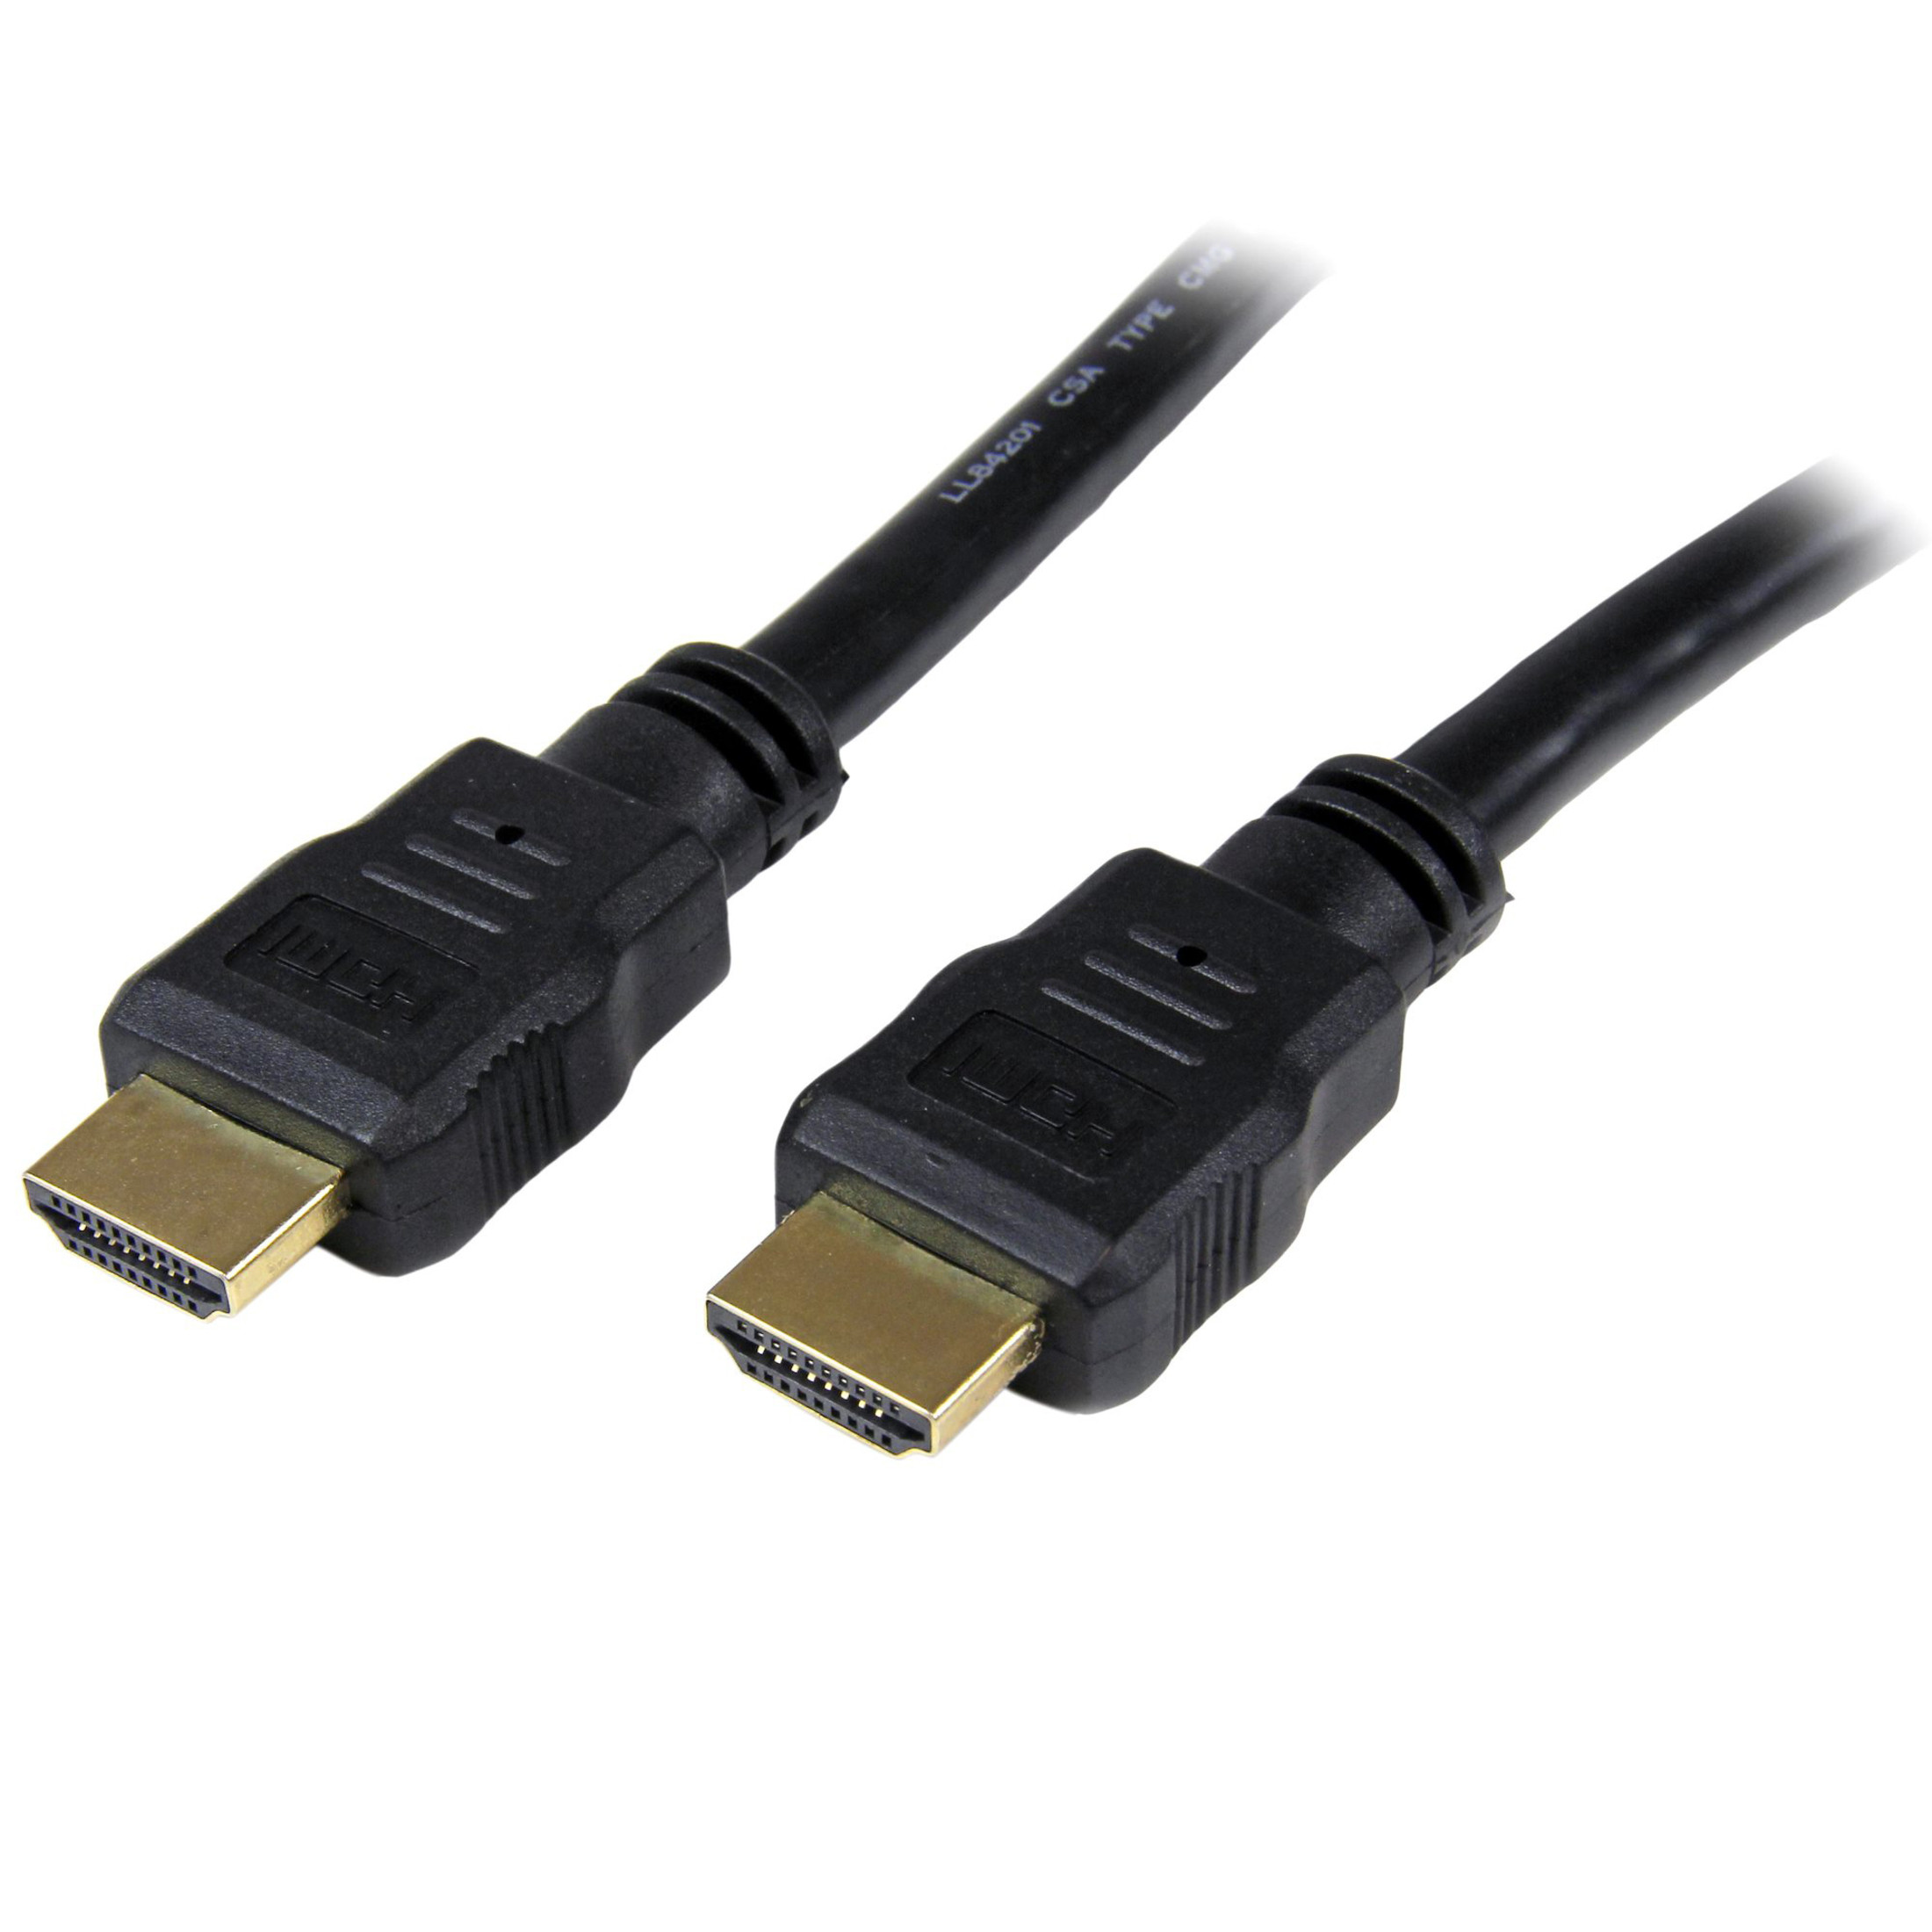 StarTech.com 3m (10ft) HDMI Cable - 4K High Speed HDMI Cable with Ethernet  - UHD 4K 30Hz Video - HDMI 1.4 Cable - Ultra HD HDMI Monitors, Projectors